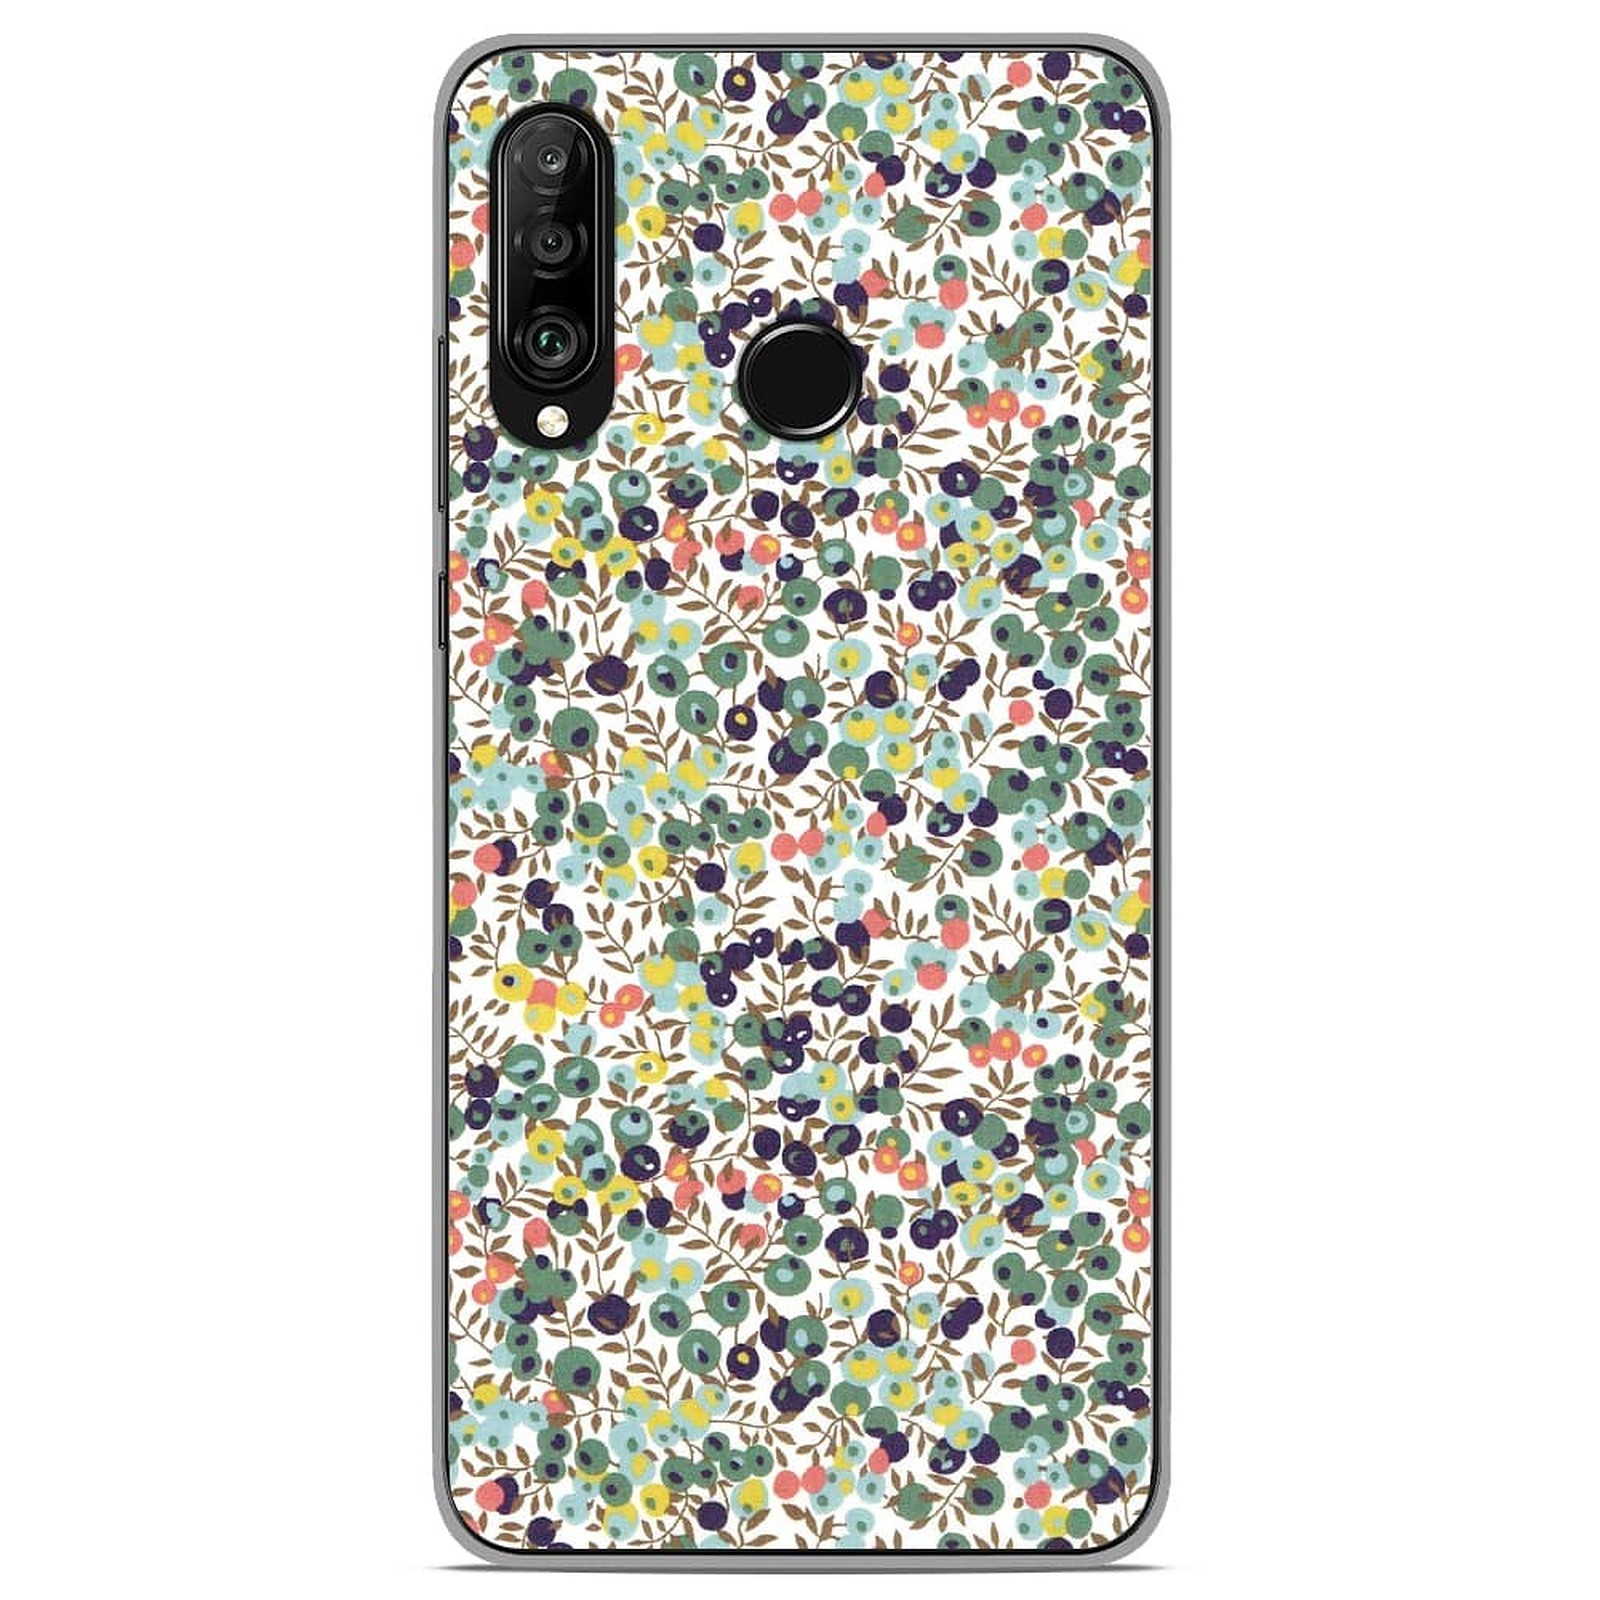 1001 Coques Coque silicone gel Huawei P30 Lite motif Liberty Wiltshire Vert - Coque telephone 1001Coques